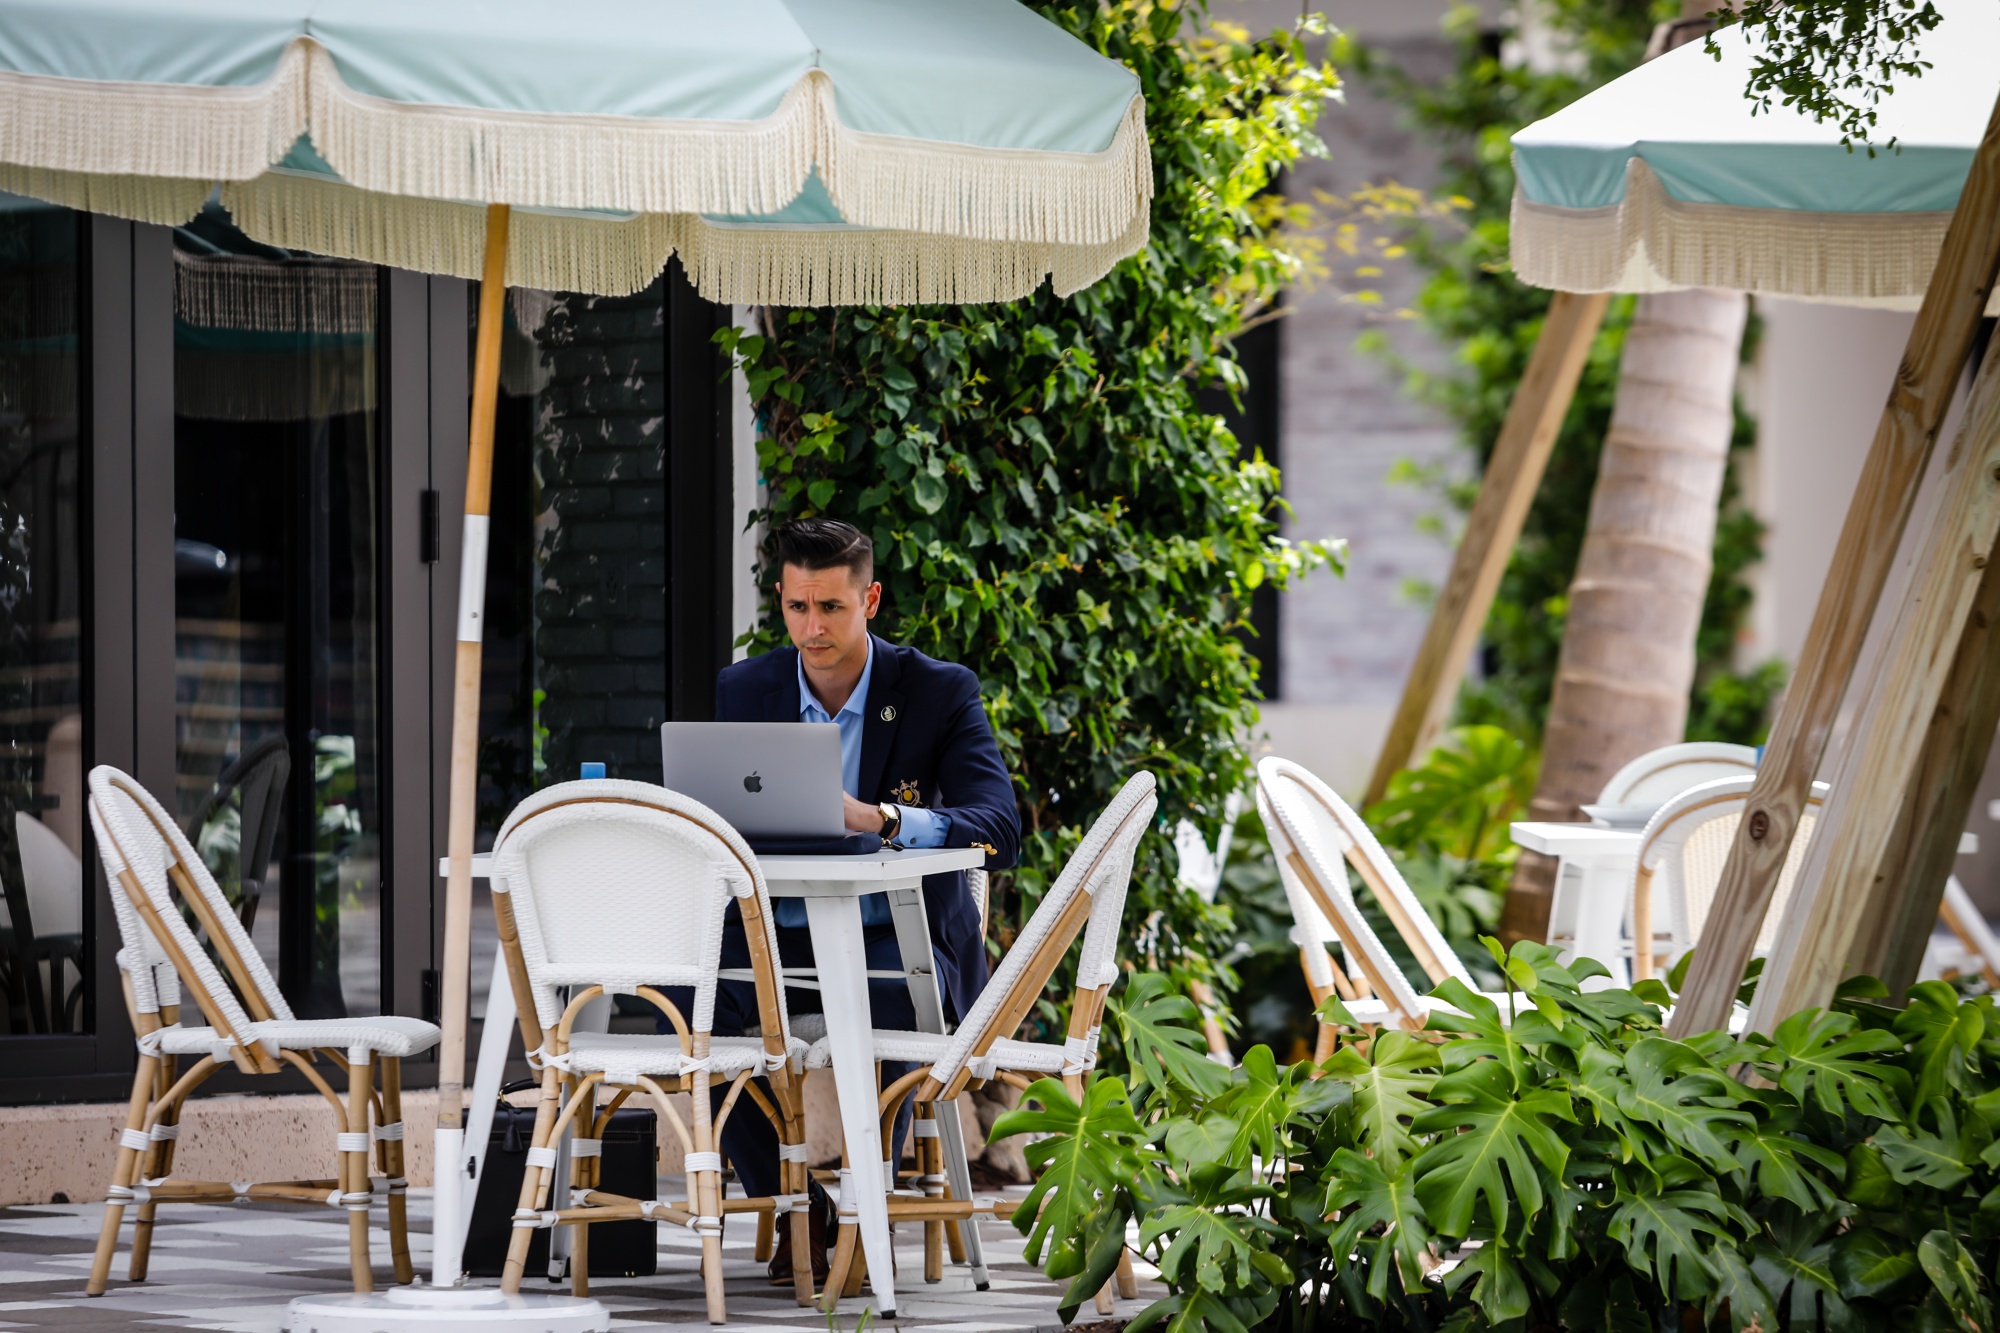 A customer works on a laptop computer in the outdoor dining area of Pura Vida restaurant on Rosemary Avenue in West Palm Beach, Florida, U.S., on Friday, Aug. 27, 2021.&nbsp;